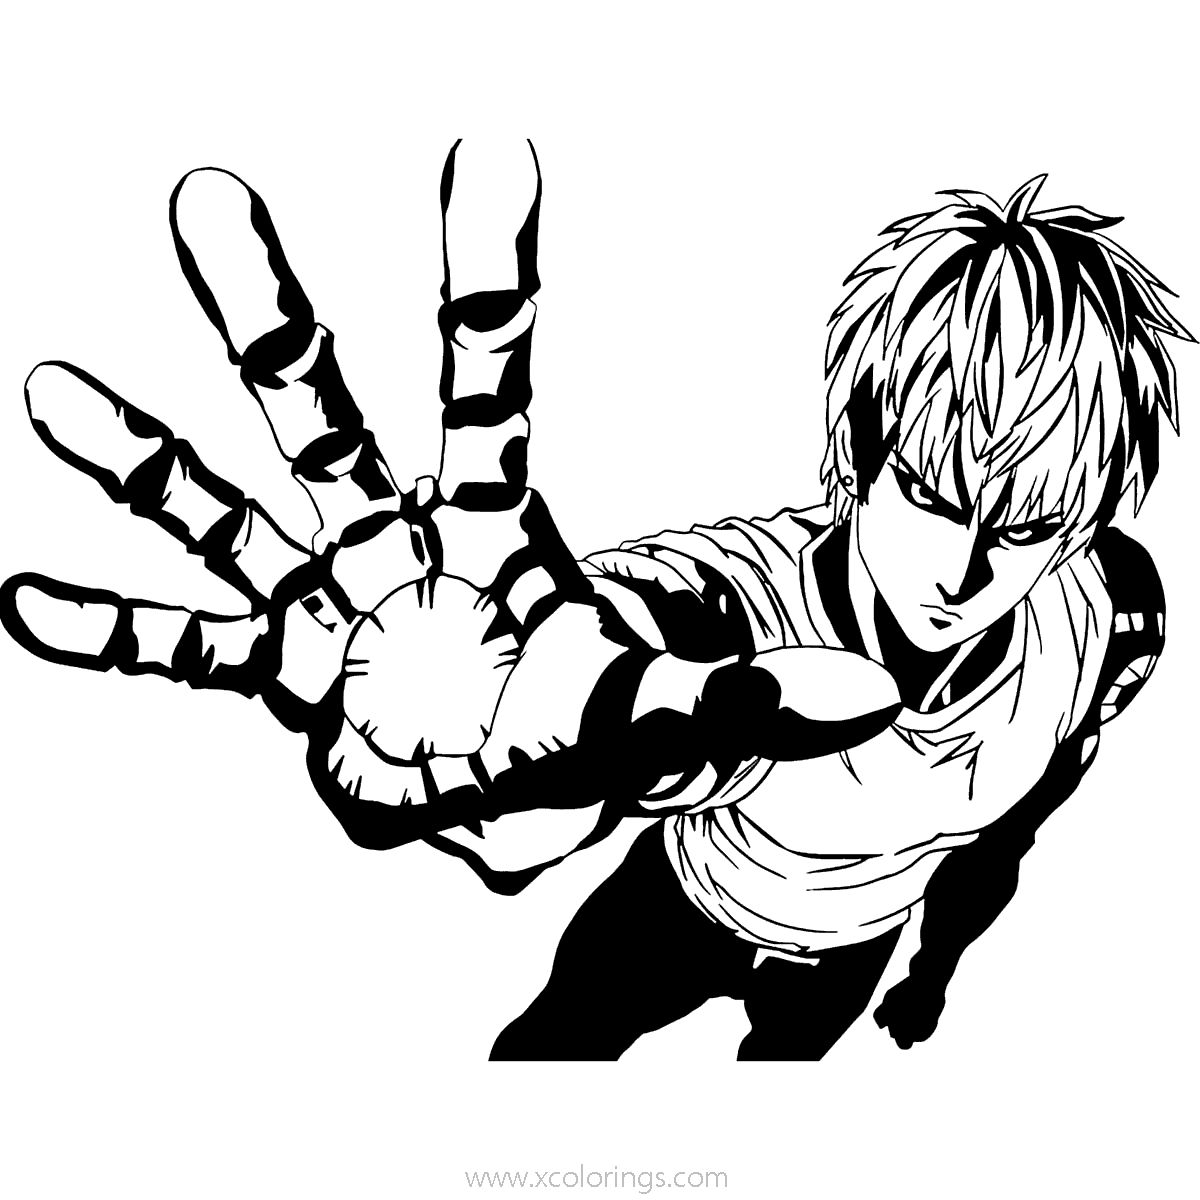 Free Genosu from One Punch Man Coloring Pages Printable printable